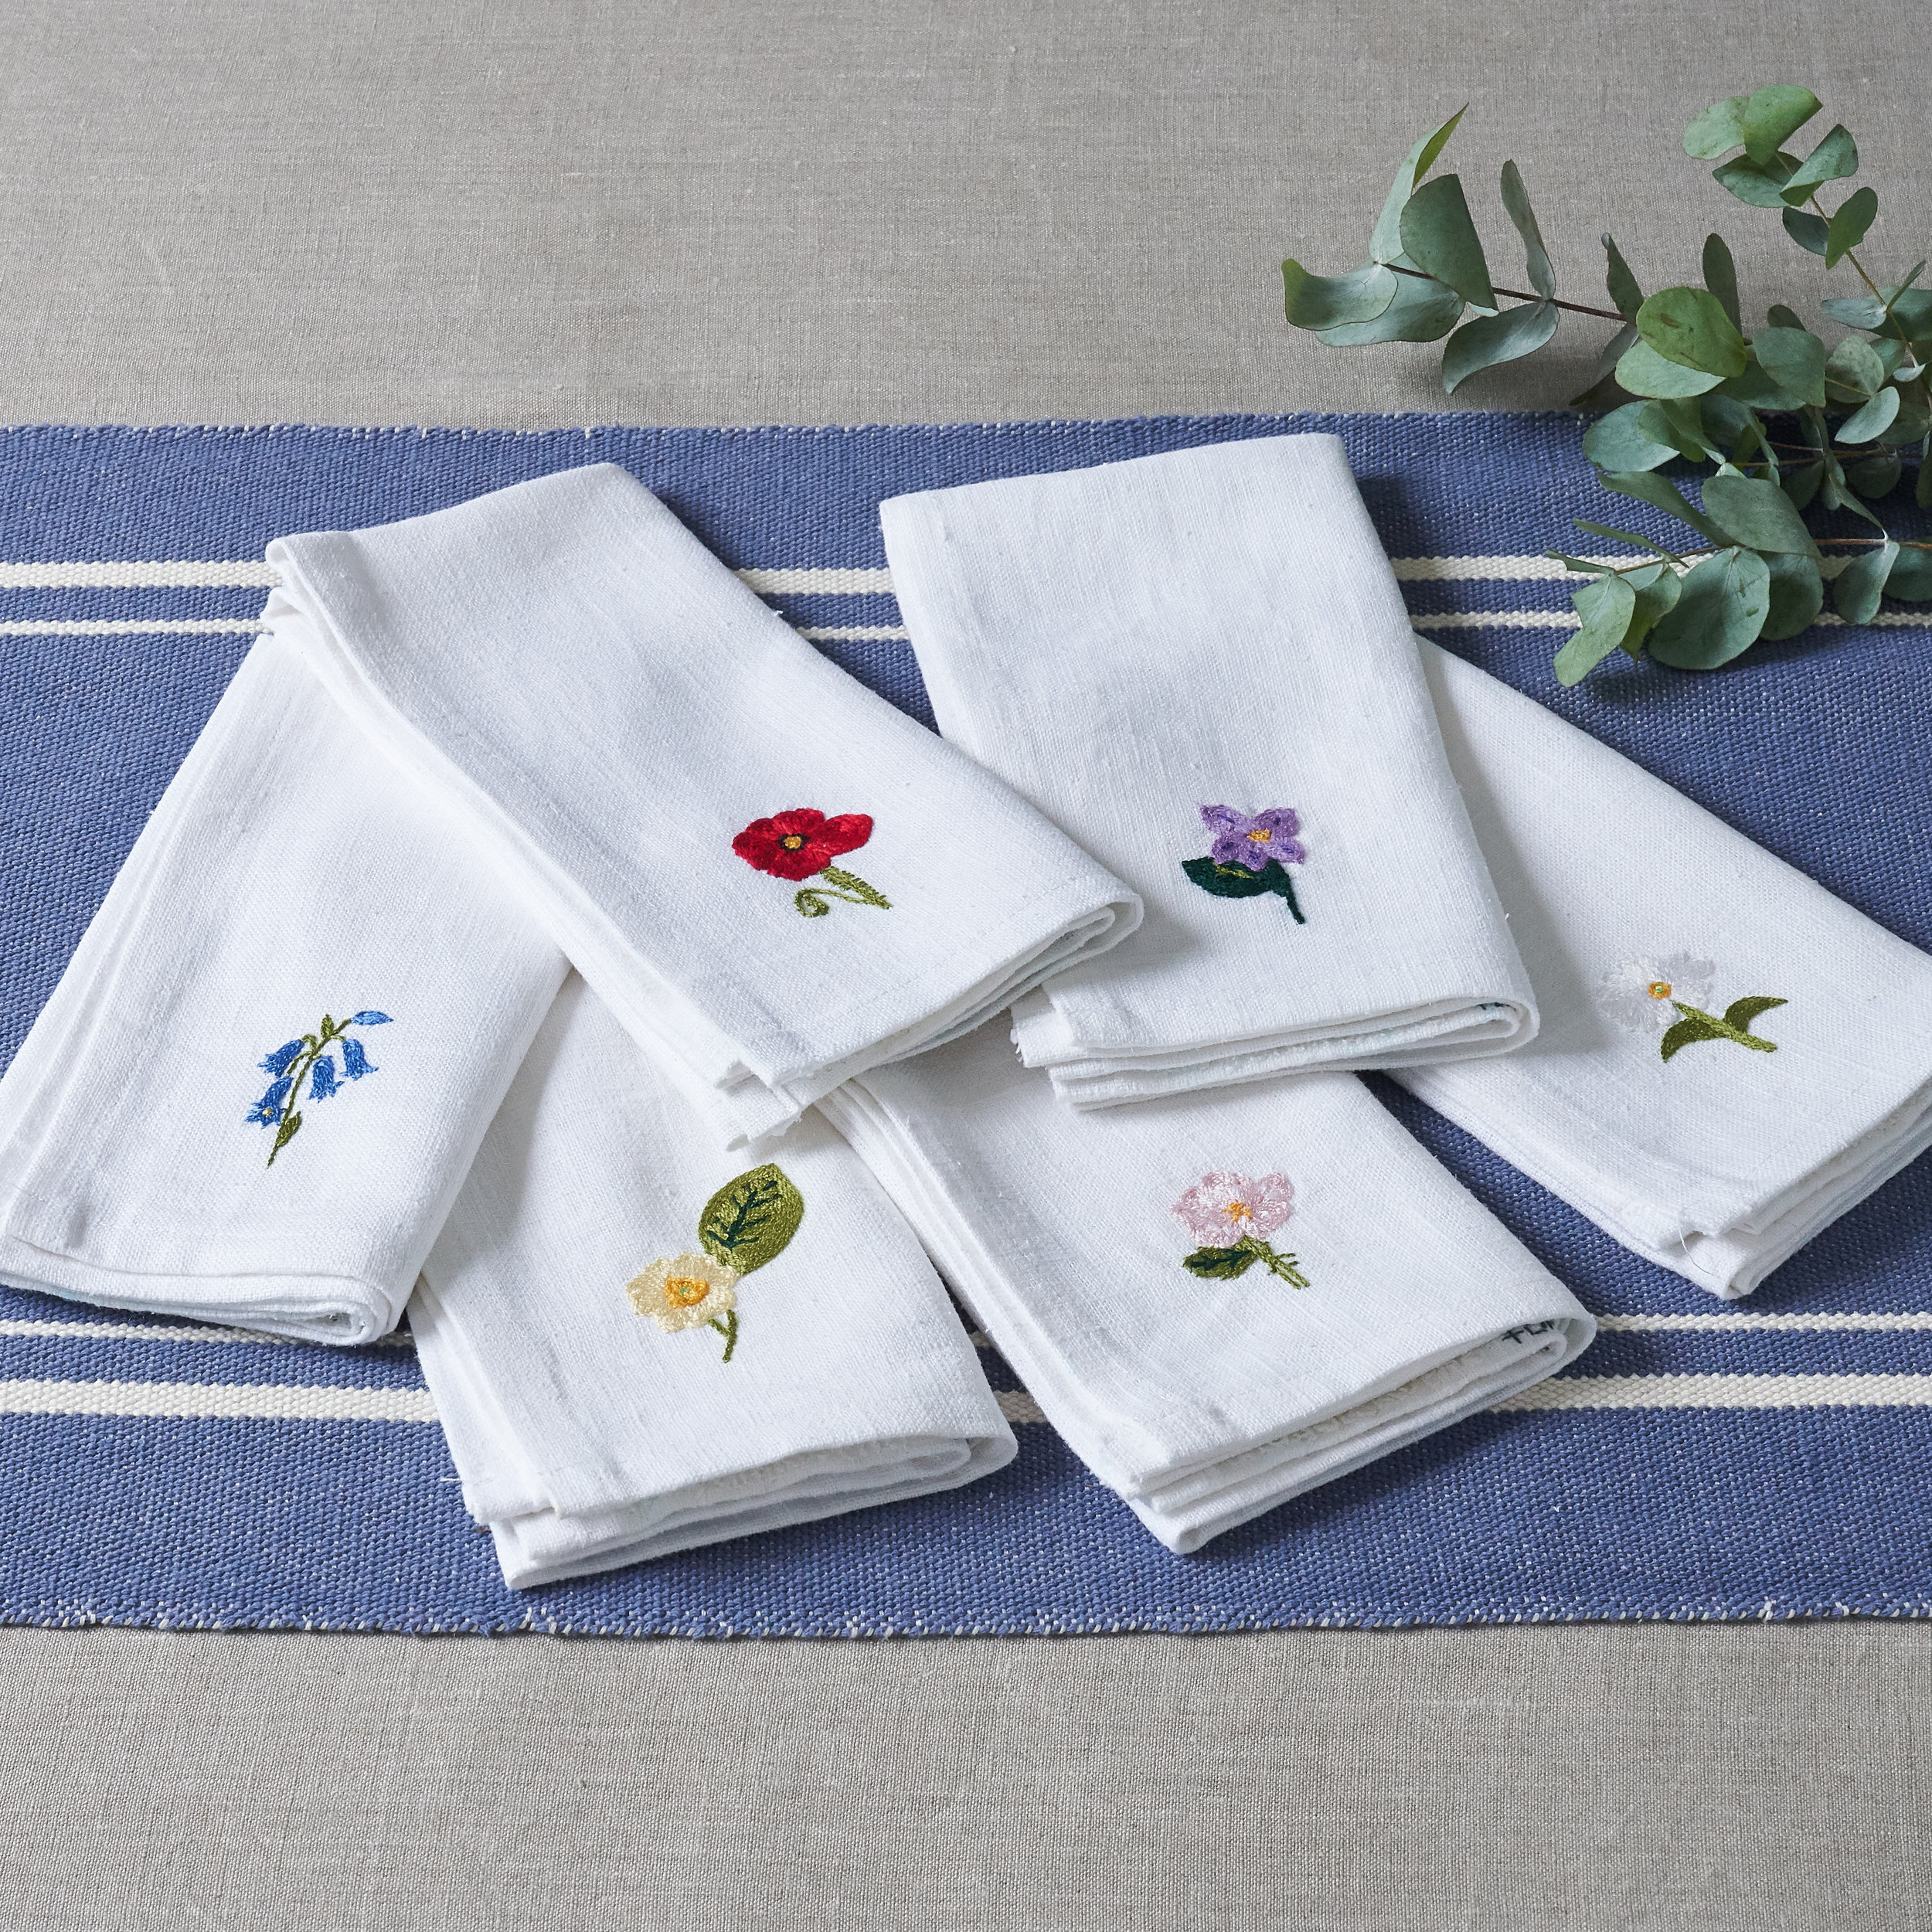 Light Blue Handmade Linen Napkin Set Featuring Personalised Floral Hand Embroidery